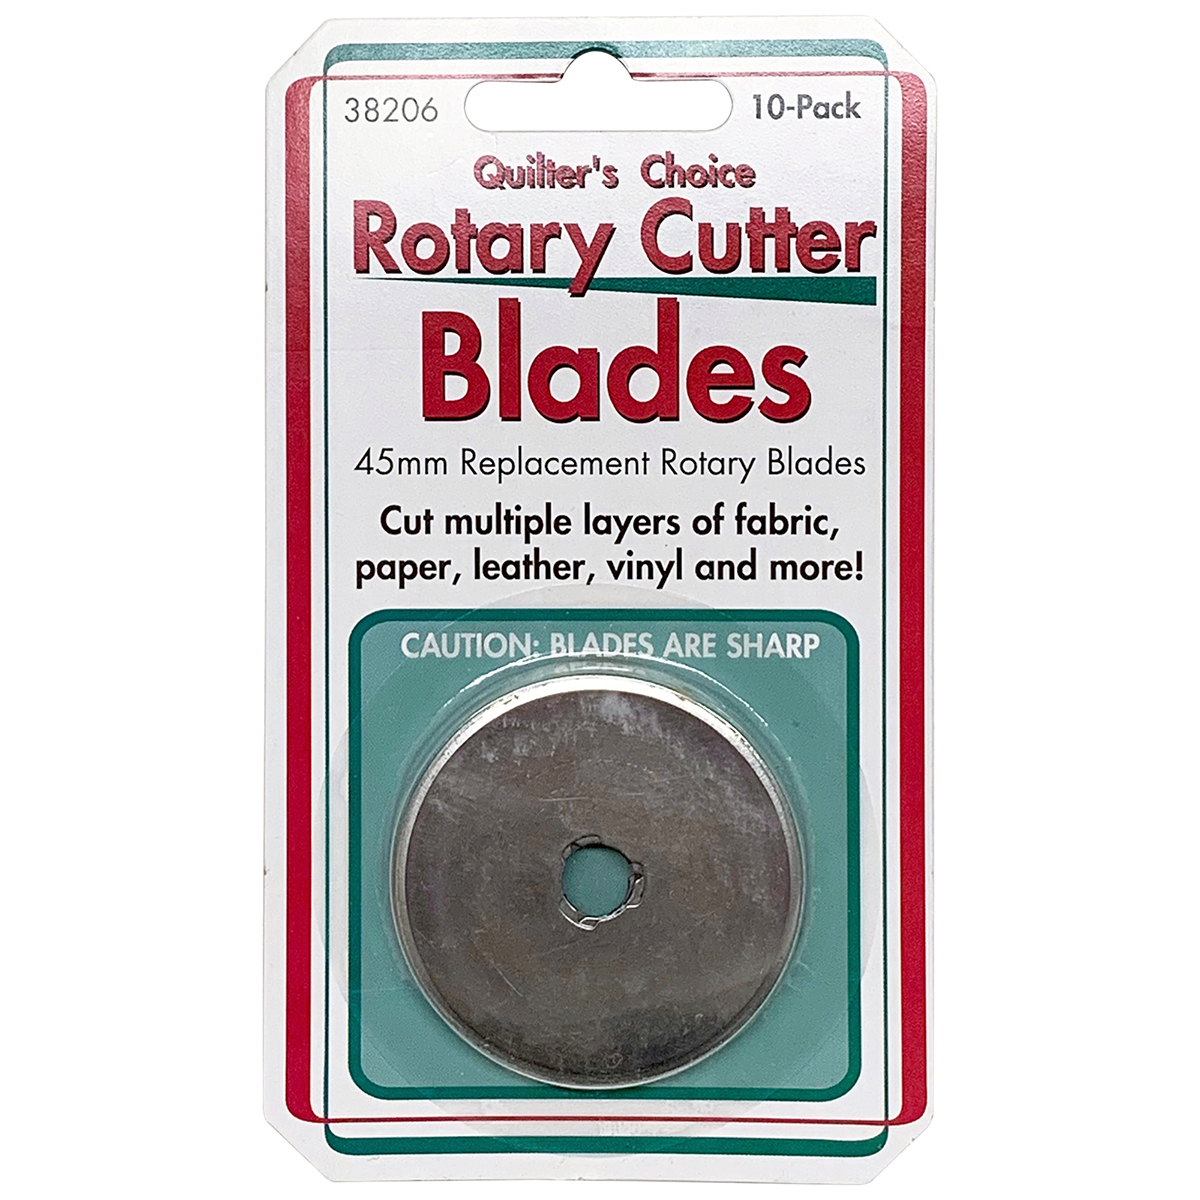  Fiskars Rotary Cutter 45mm Replacement Blades - 5-Pack - 45mm  Stainless Steel Rotary Cutter Blade - Craft Supplies : Arts, Crafts & Sewing